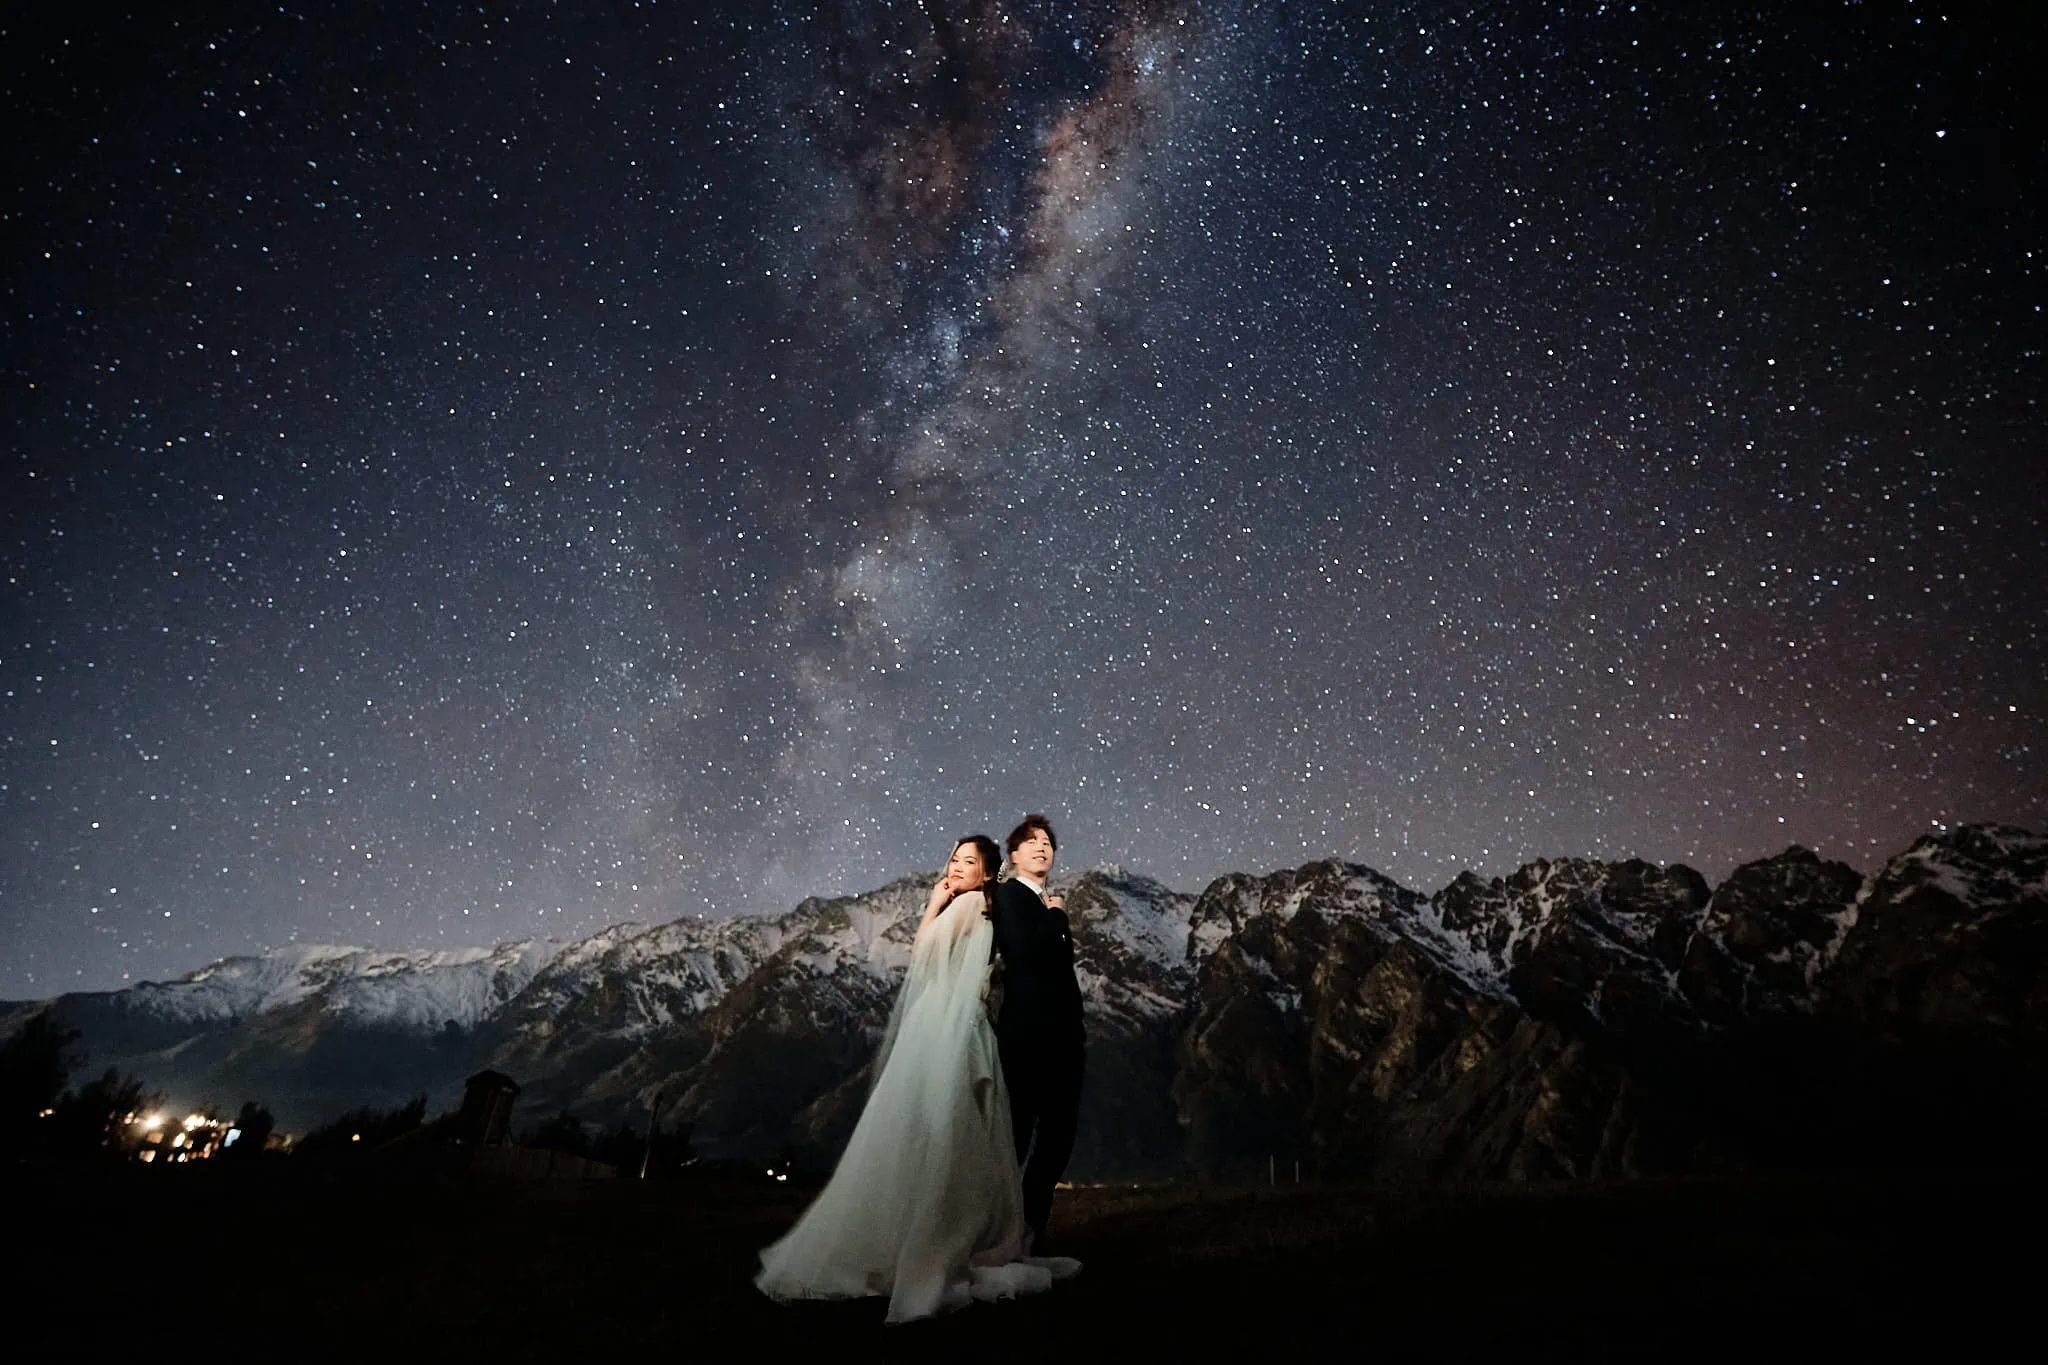 Queenstown New Zealand Elopement Wedding Photographer - A bride and groom captured in a breathtaking starry night shoot for their portfolio.